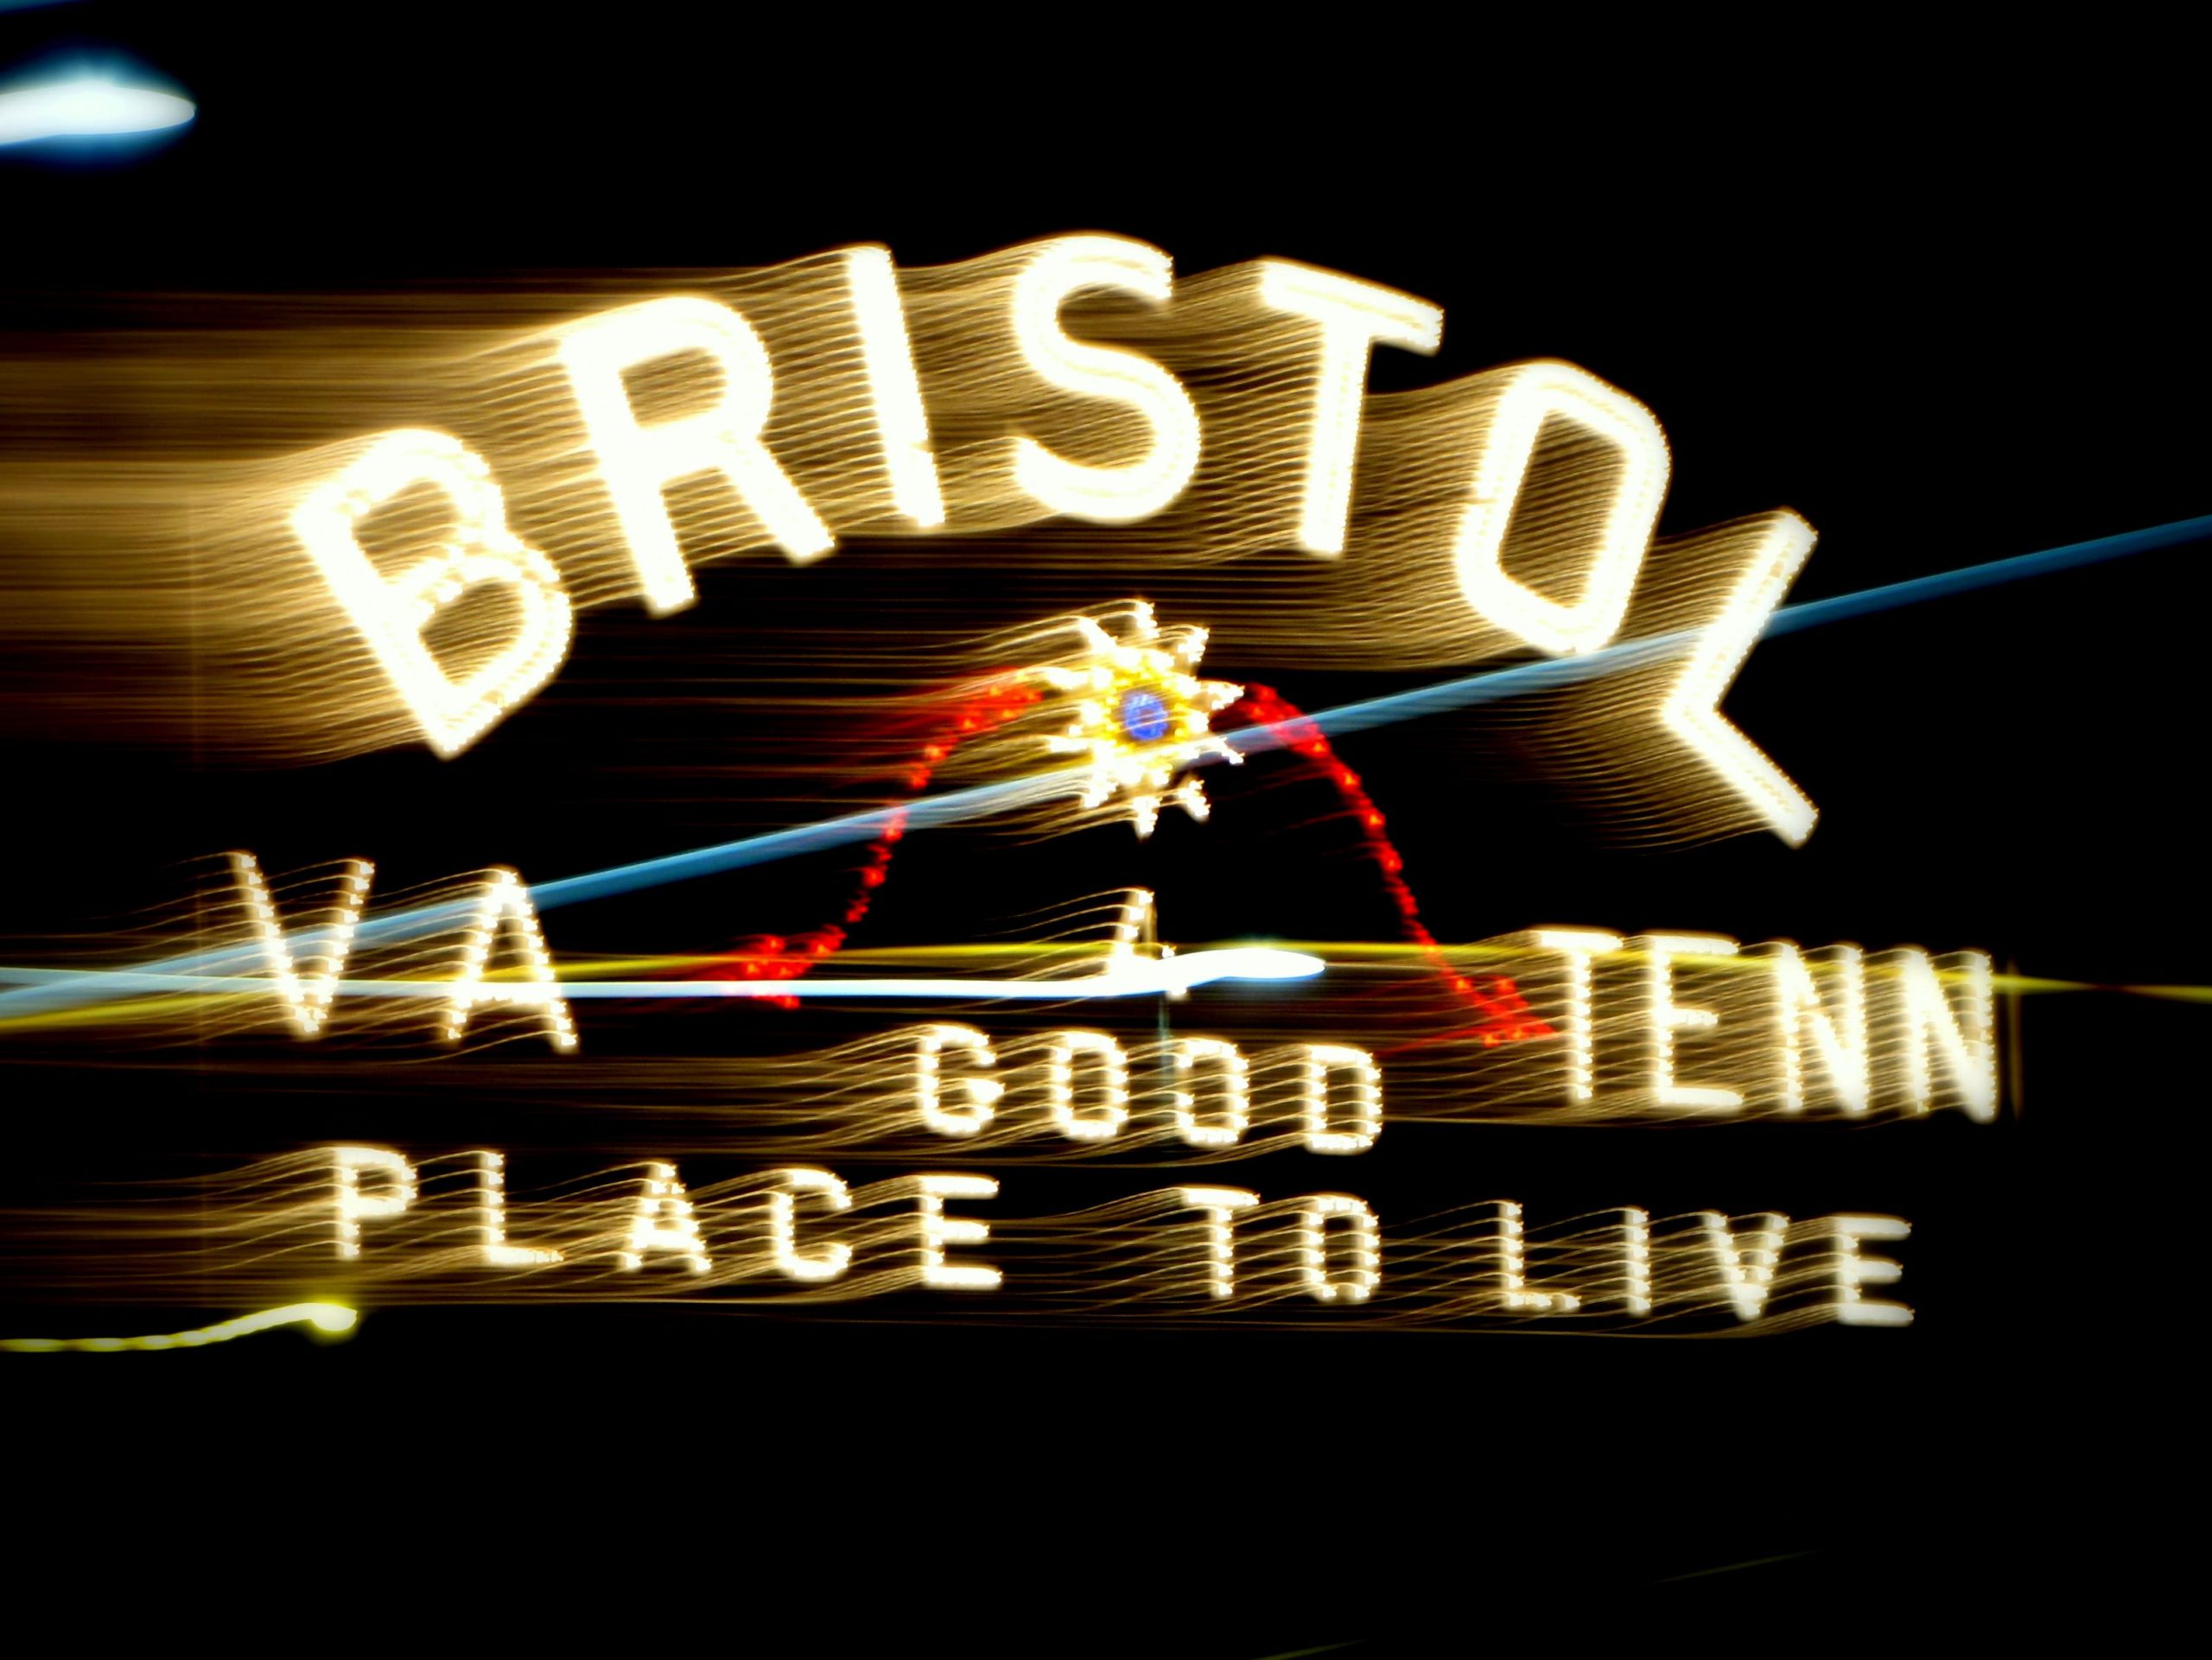 The iconic Bristol sign reads: Bristol VA Tenn A Good Place to Live
